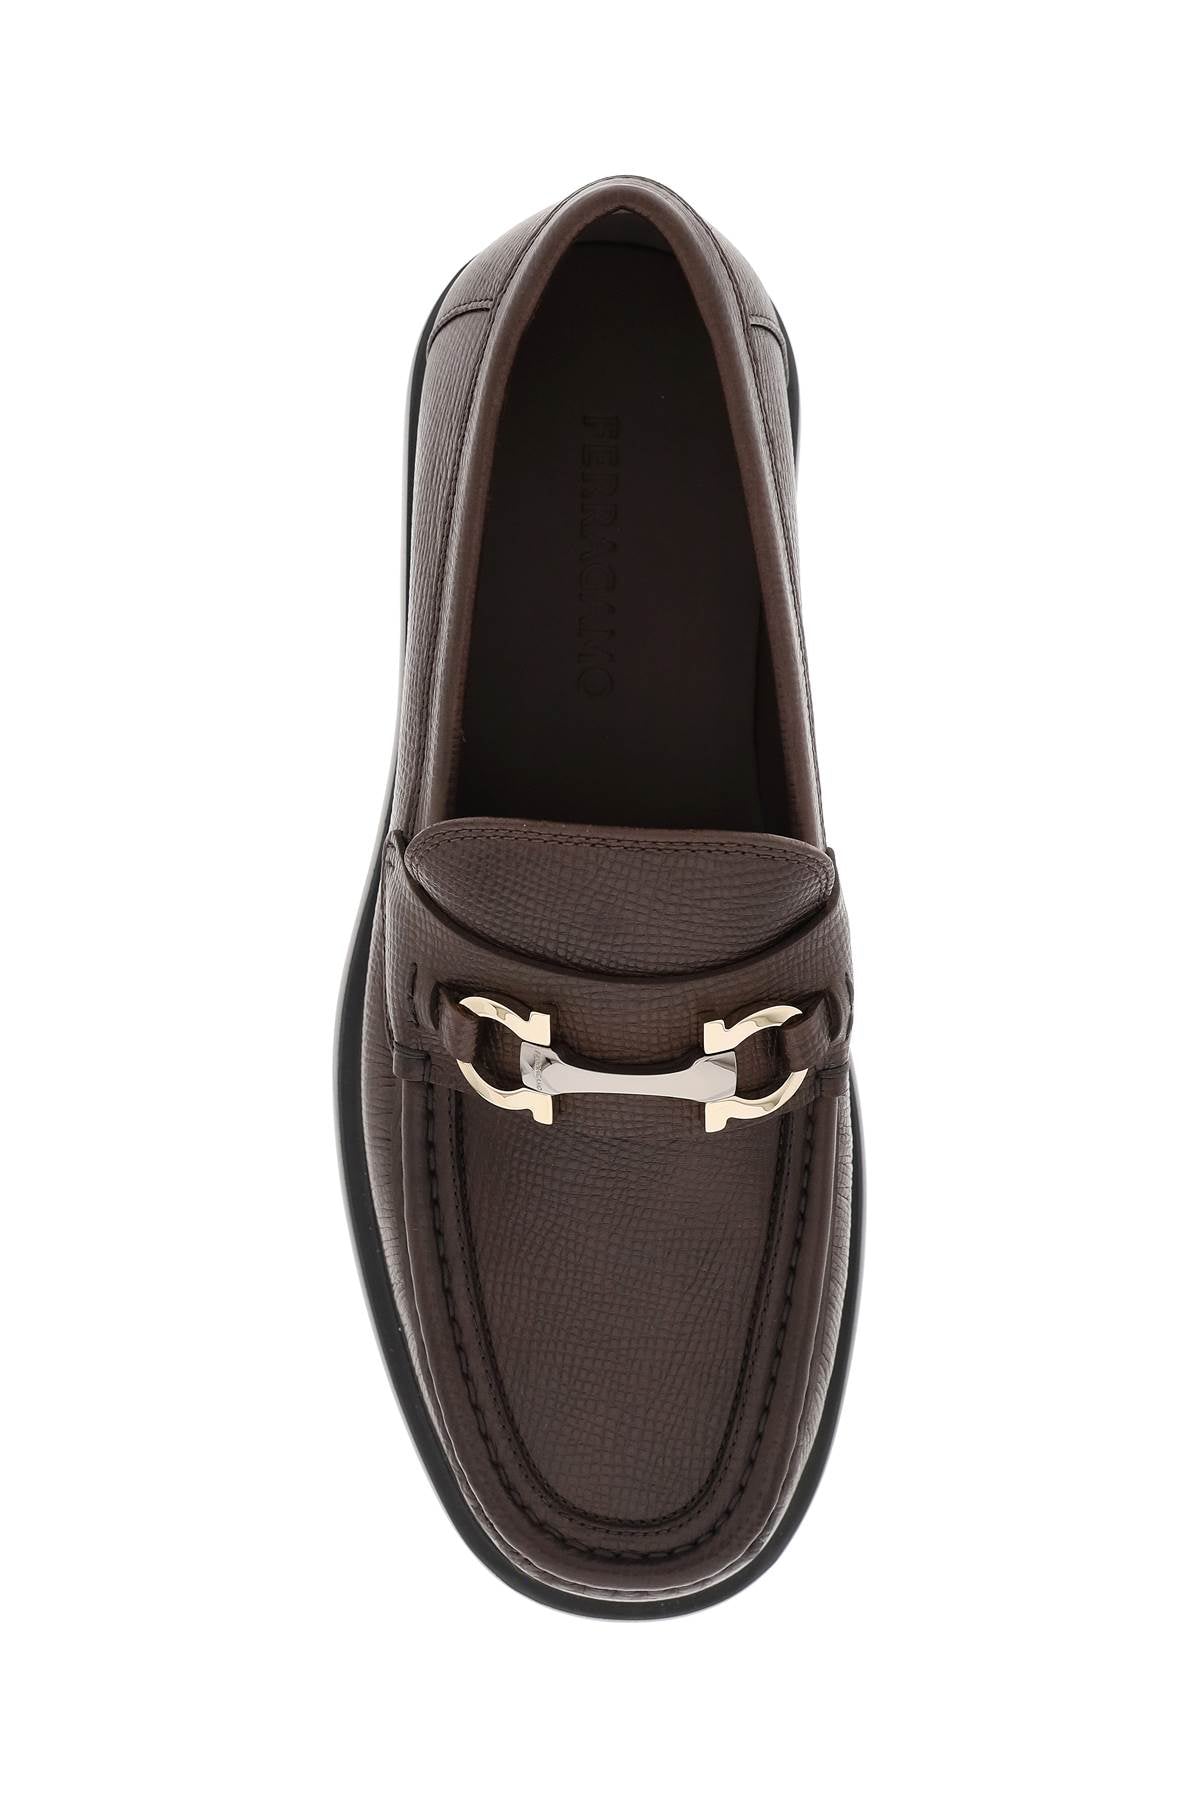 Shop Ferragamo Embossed Leather Loafers With Gancini Hook For Men In Brown